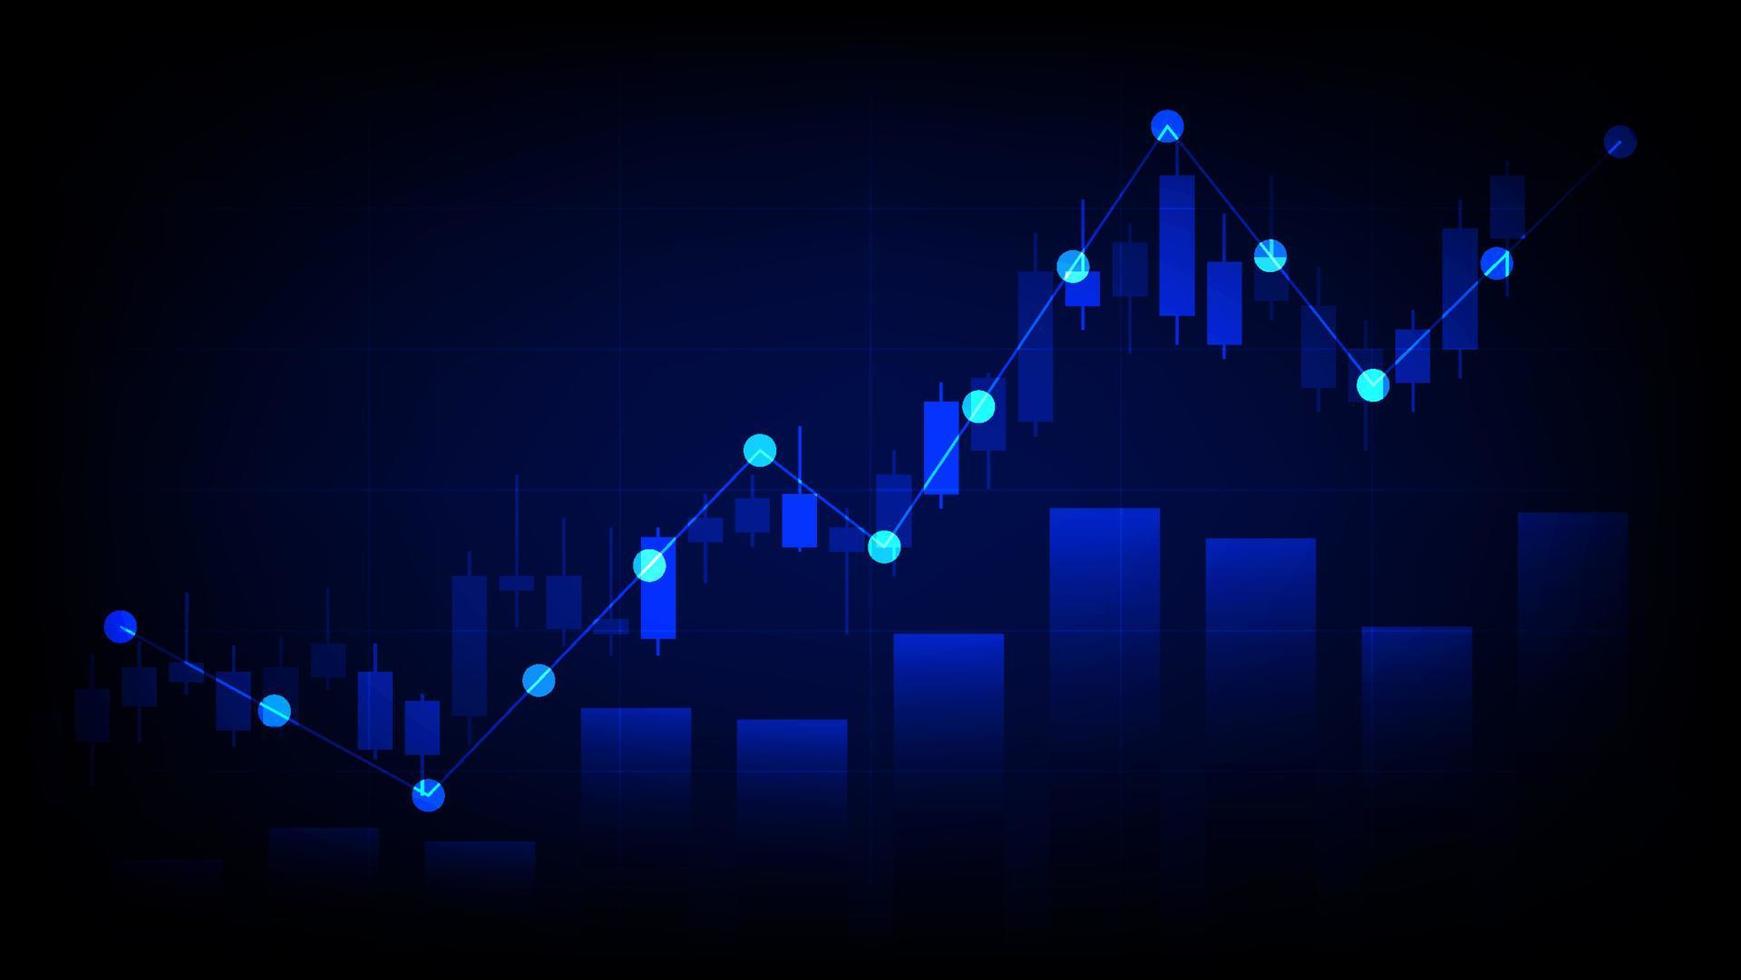 Economy and finance concept. financial business investment statistics with stock market candlesticks and bar chart on blue background vector